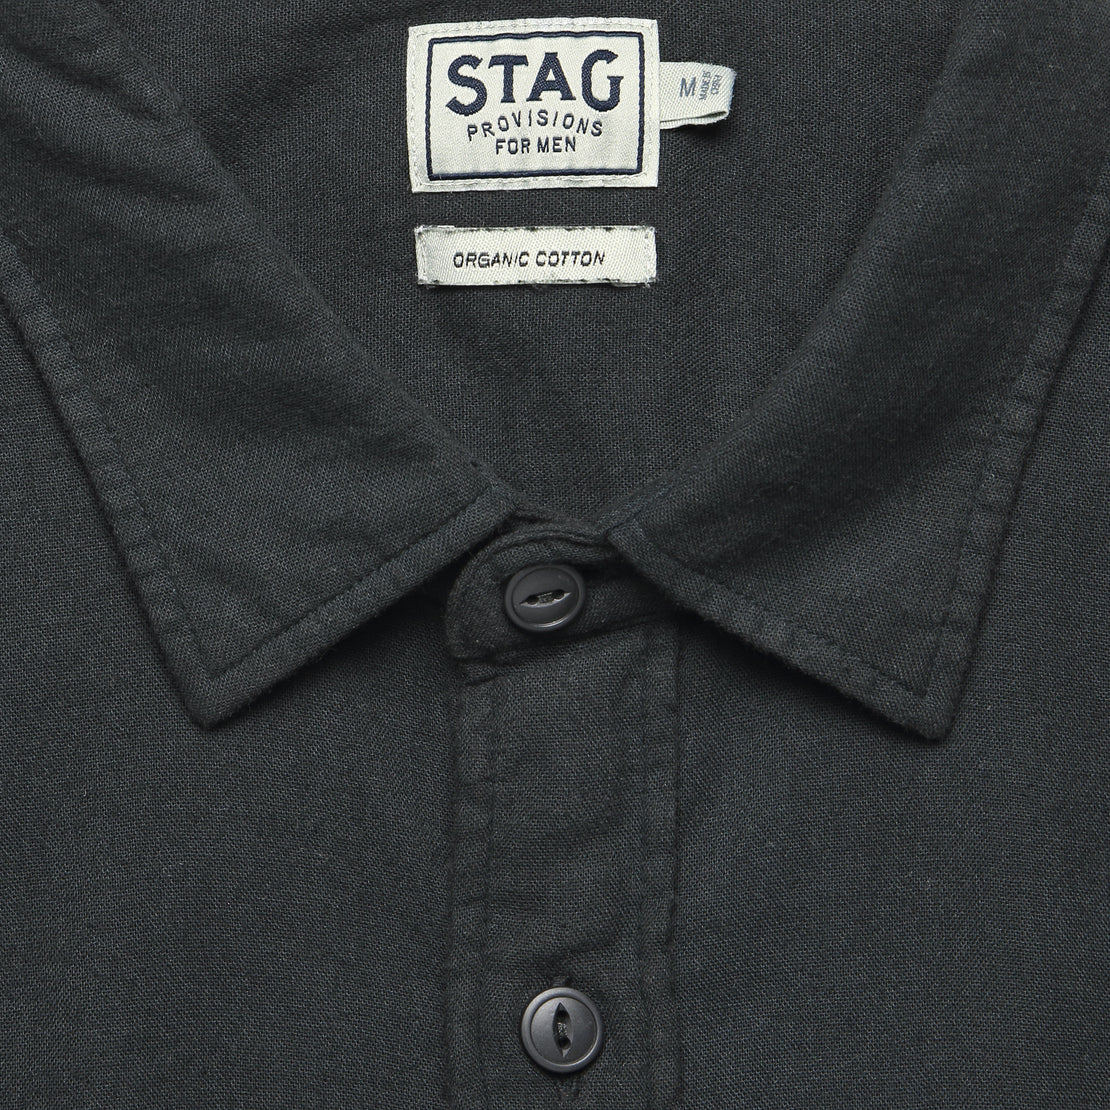 Garment-Dyed Double Cloth Shirt - Washed Black - STAG - STAG Provisions - Tops - L/S Woven - Solid